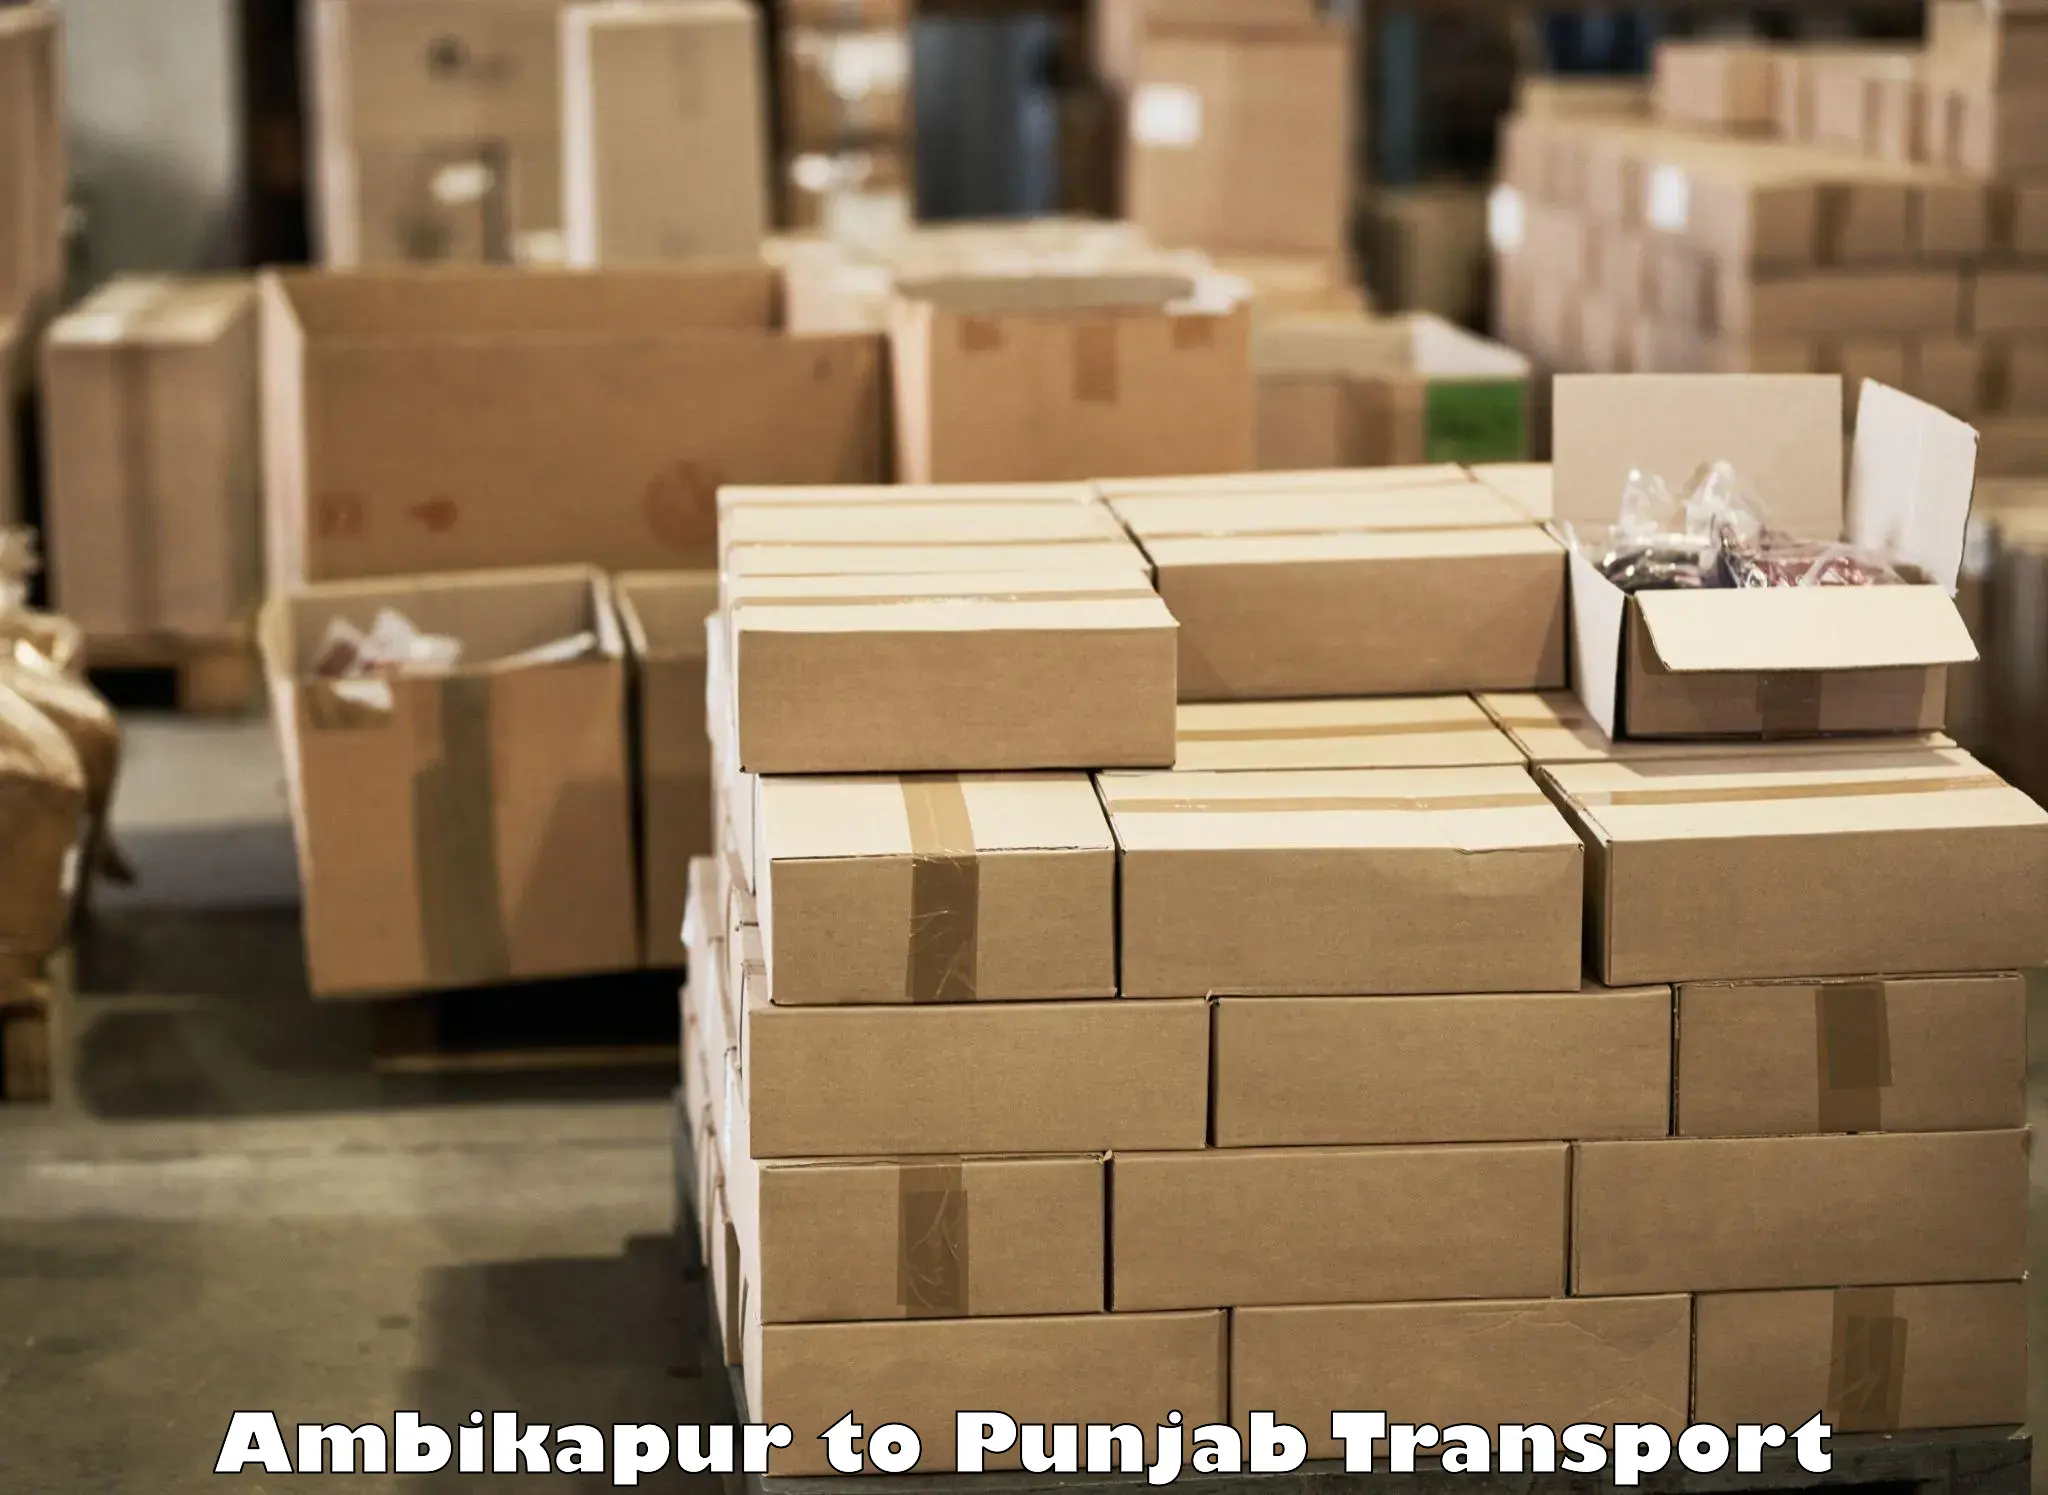 Nearby transport service Ambikapur to Sangrur